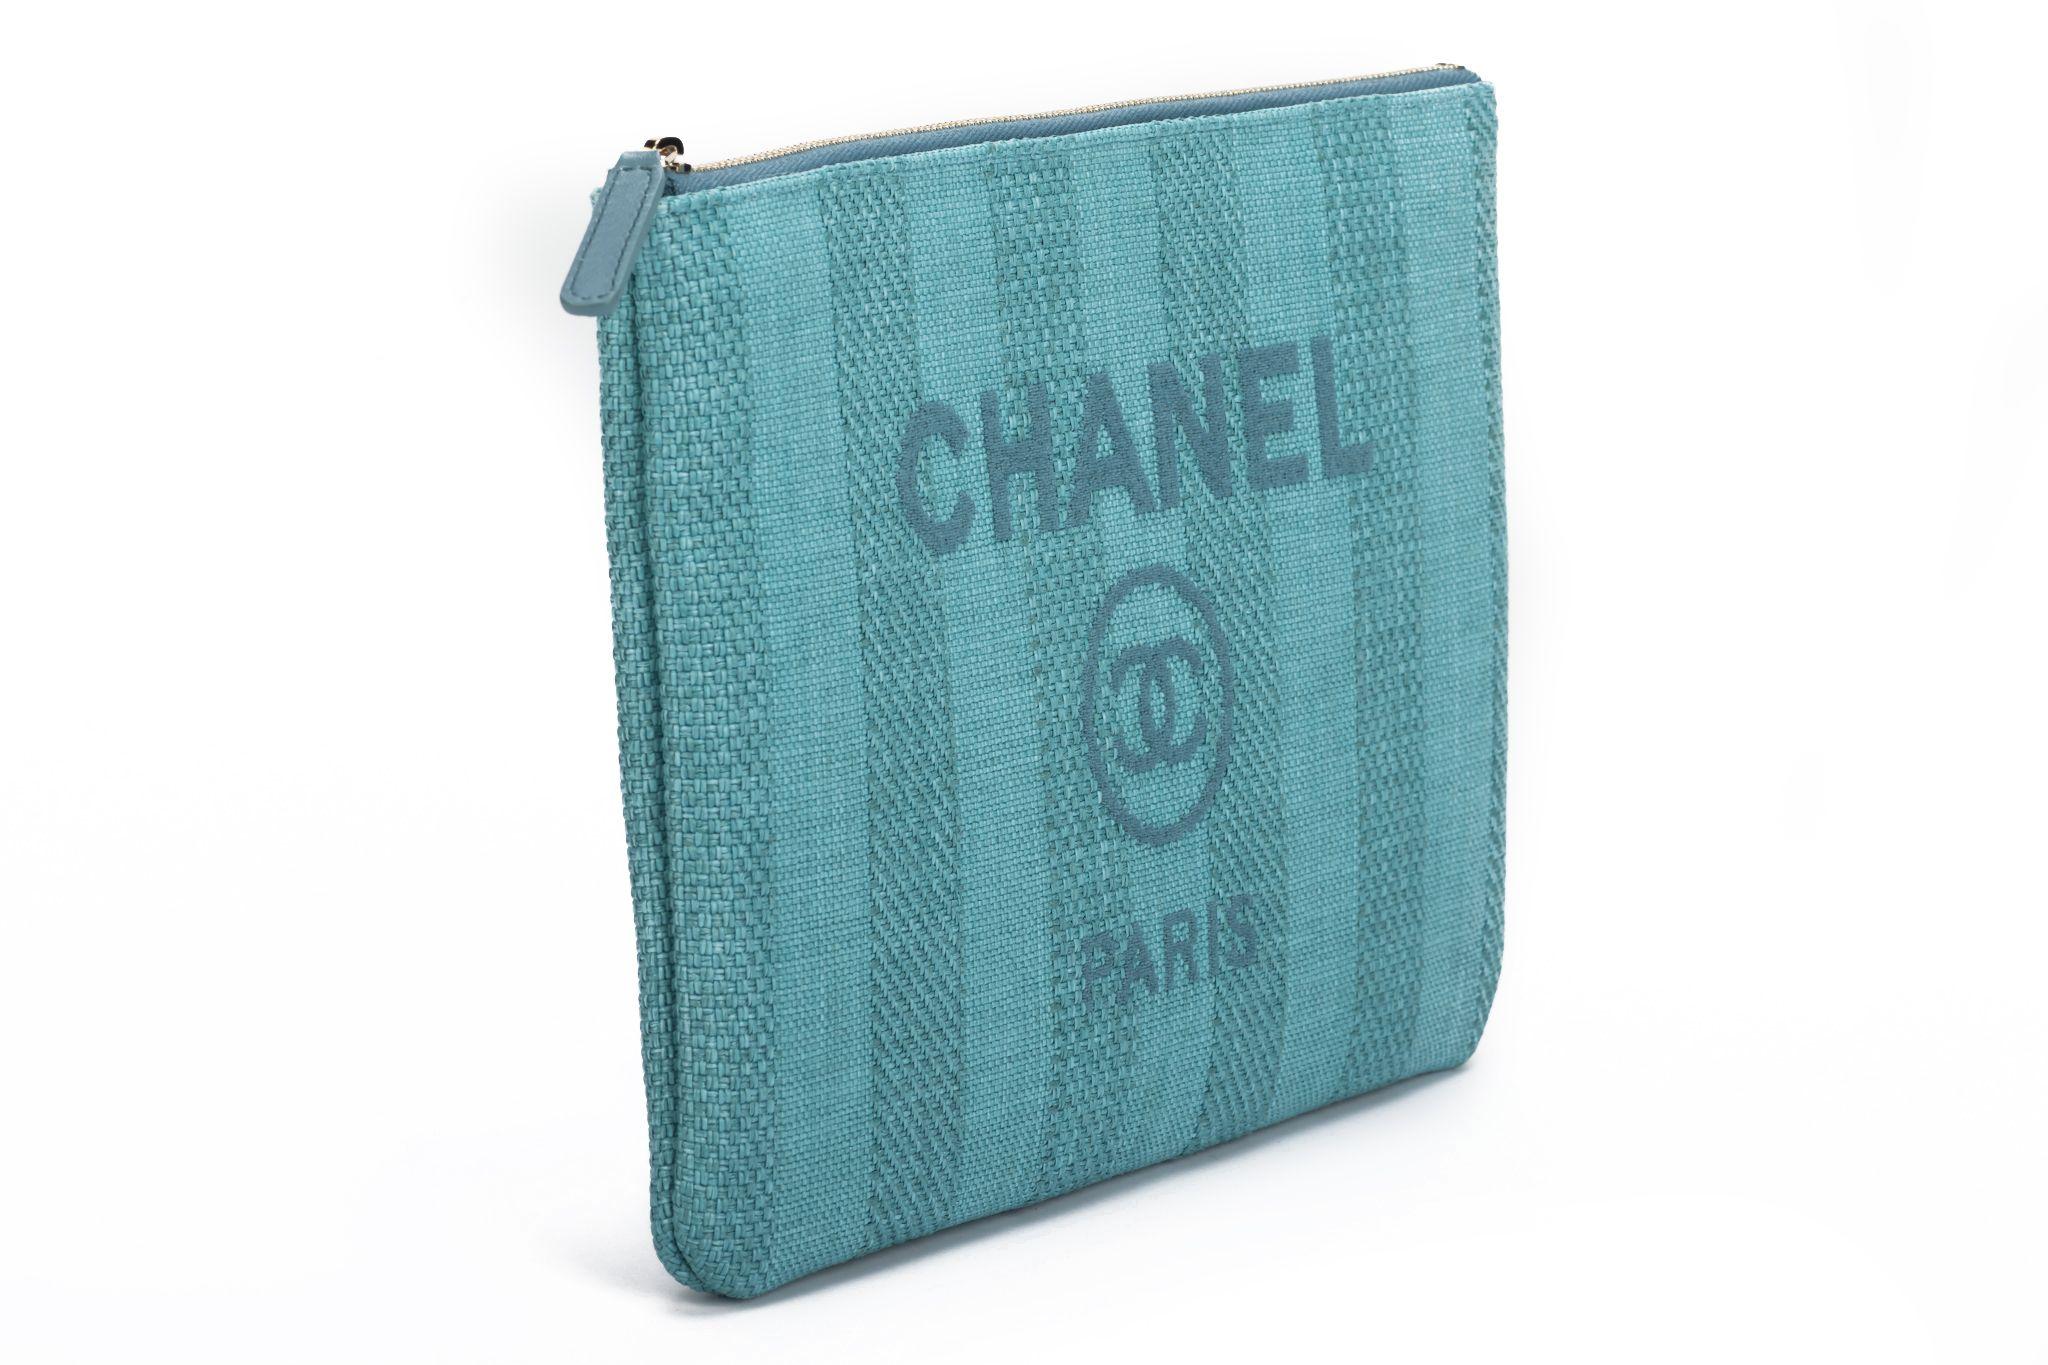 Chanel new Deauville clutch in striped aqua fabric. Collection 29.Comes with hologram, ID card, dust cover over and box.
